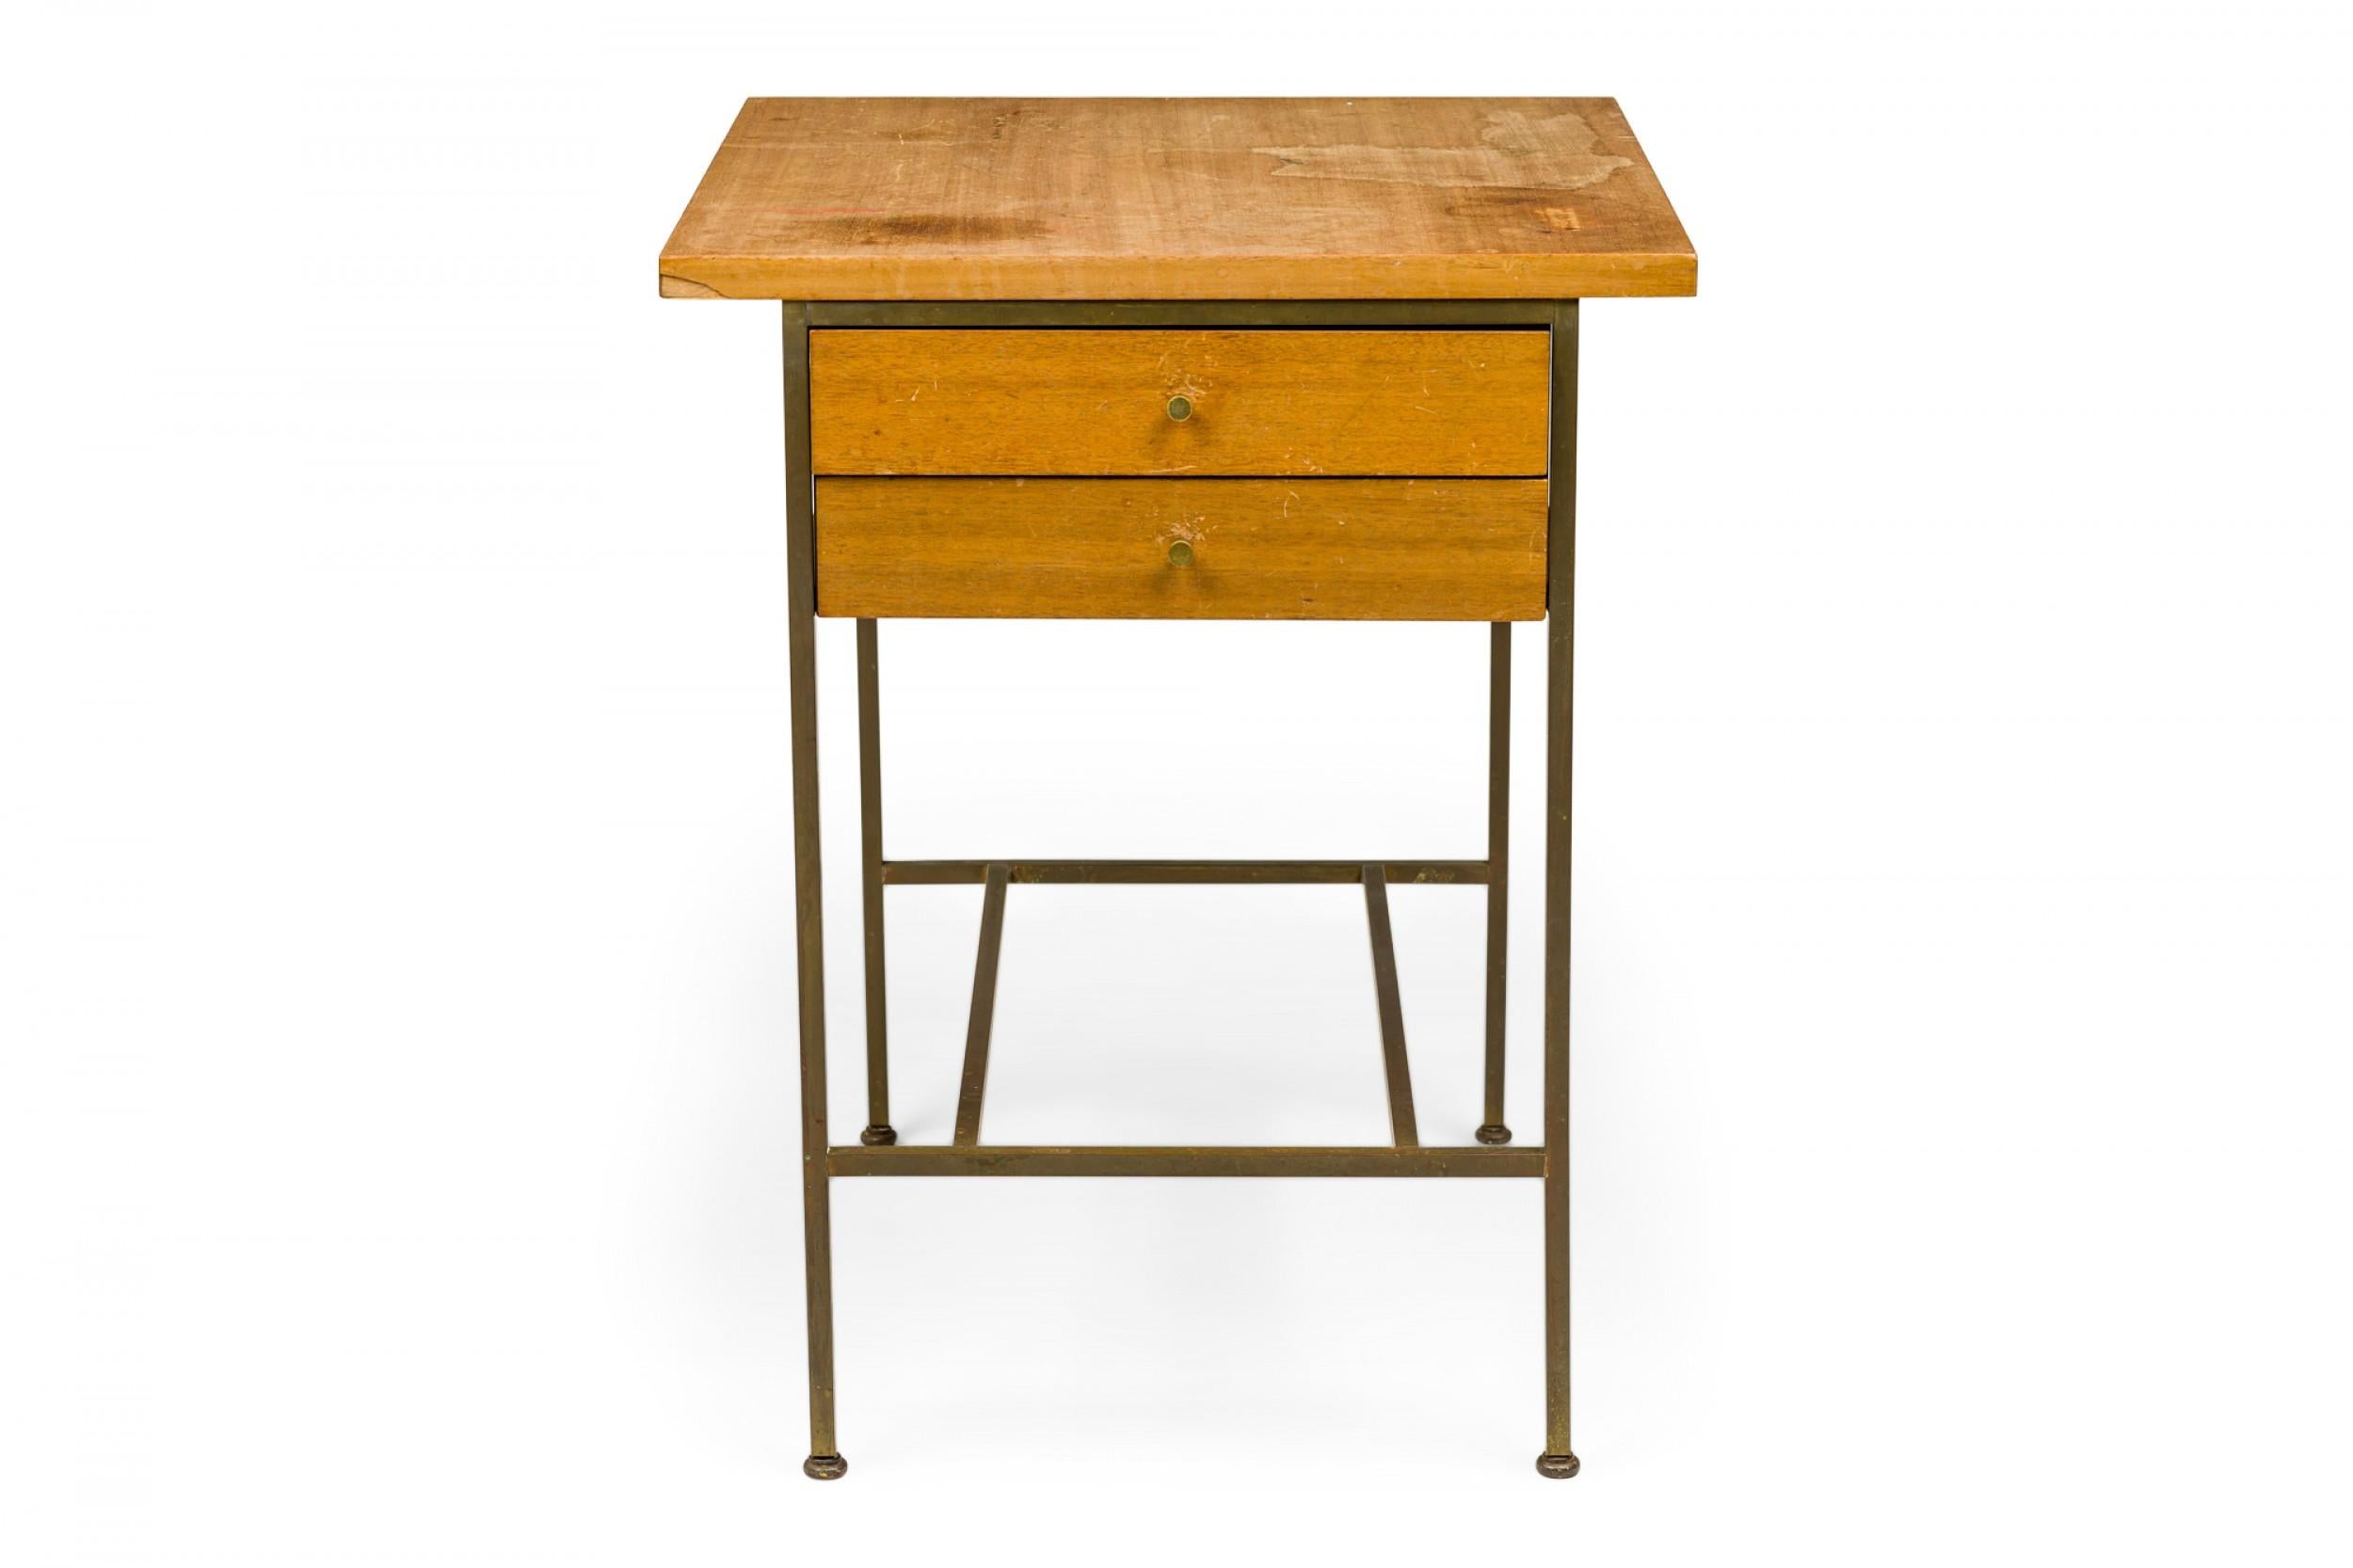 American mid-century rectangular nightstand / end table with a rectangular blond wooden top over two drawers with brass knob drawer pulls, supported by a brass frame with a stretcher base. (PAUL MCCOBB FOR CALVIN FURNITURE COMPANY)